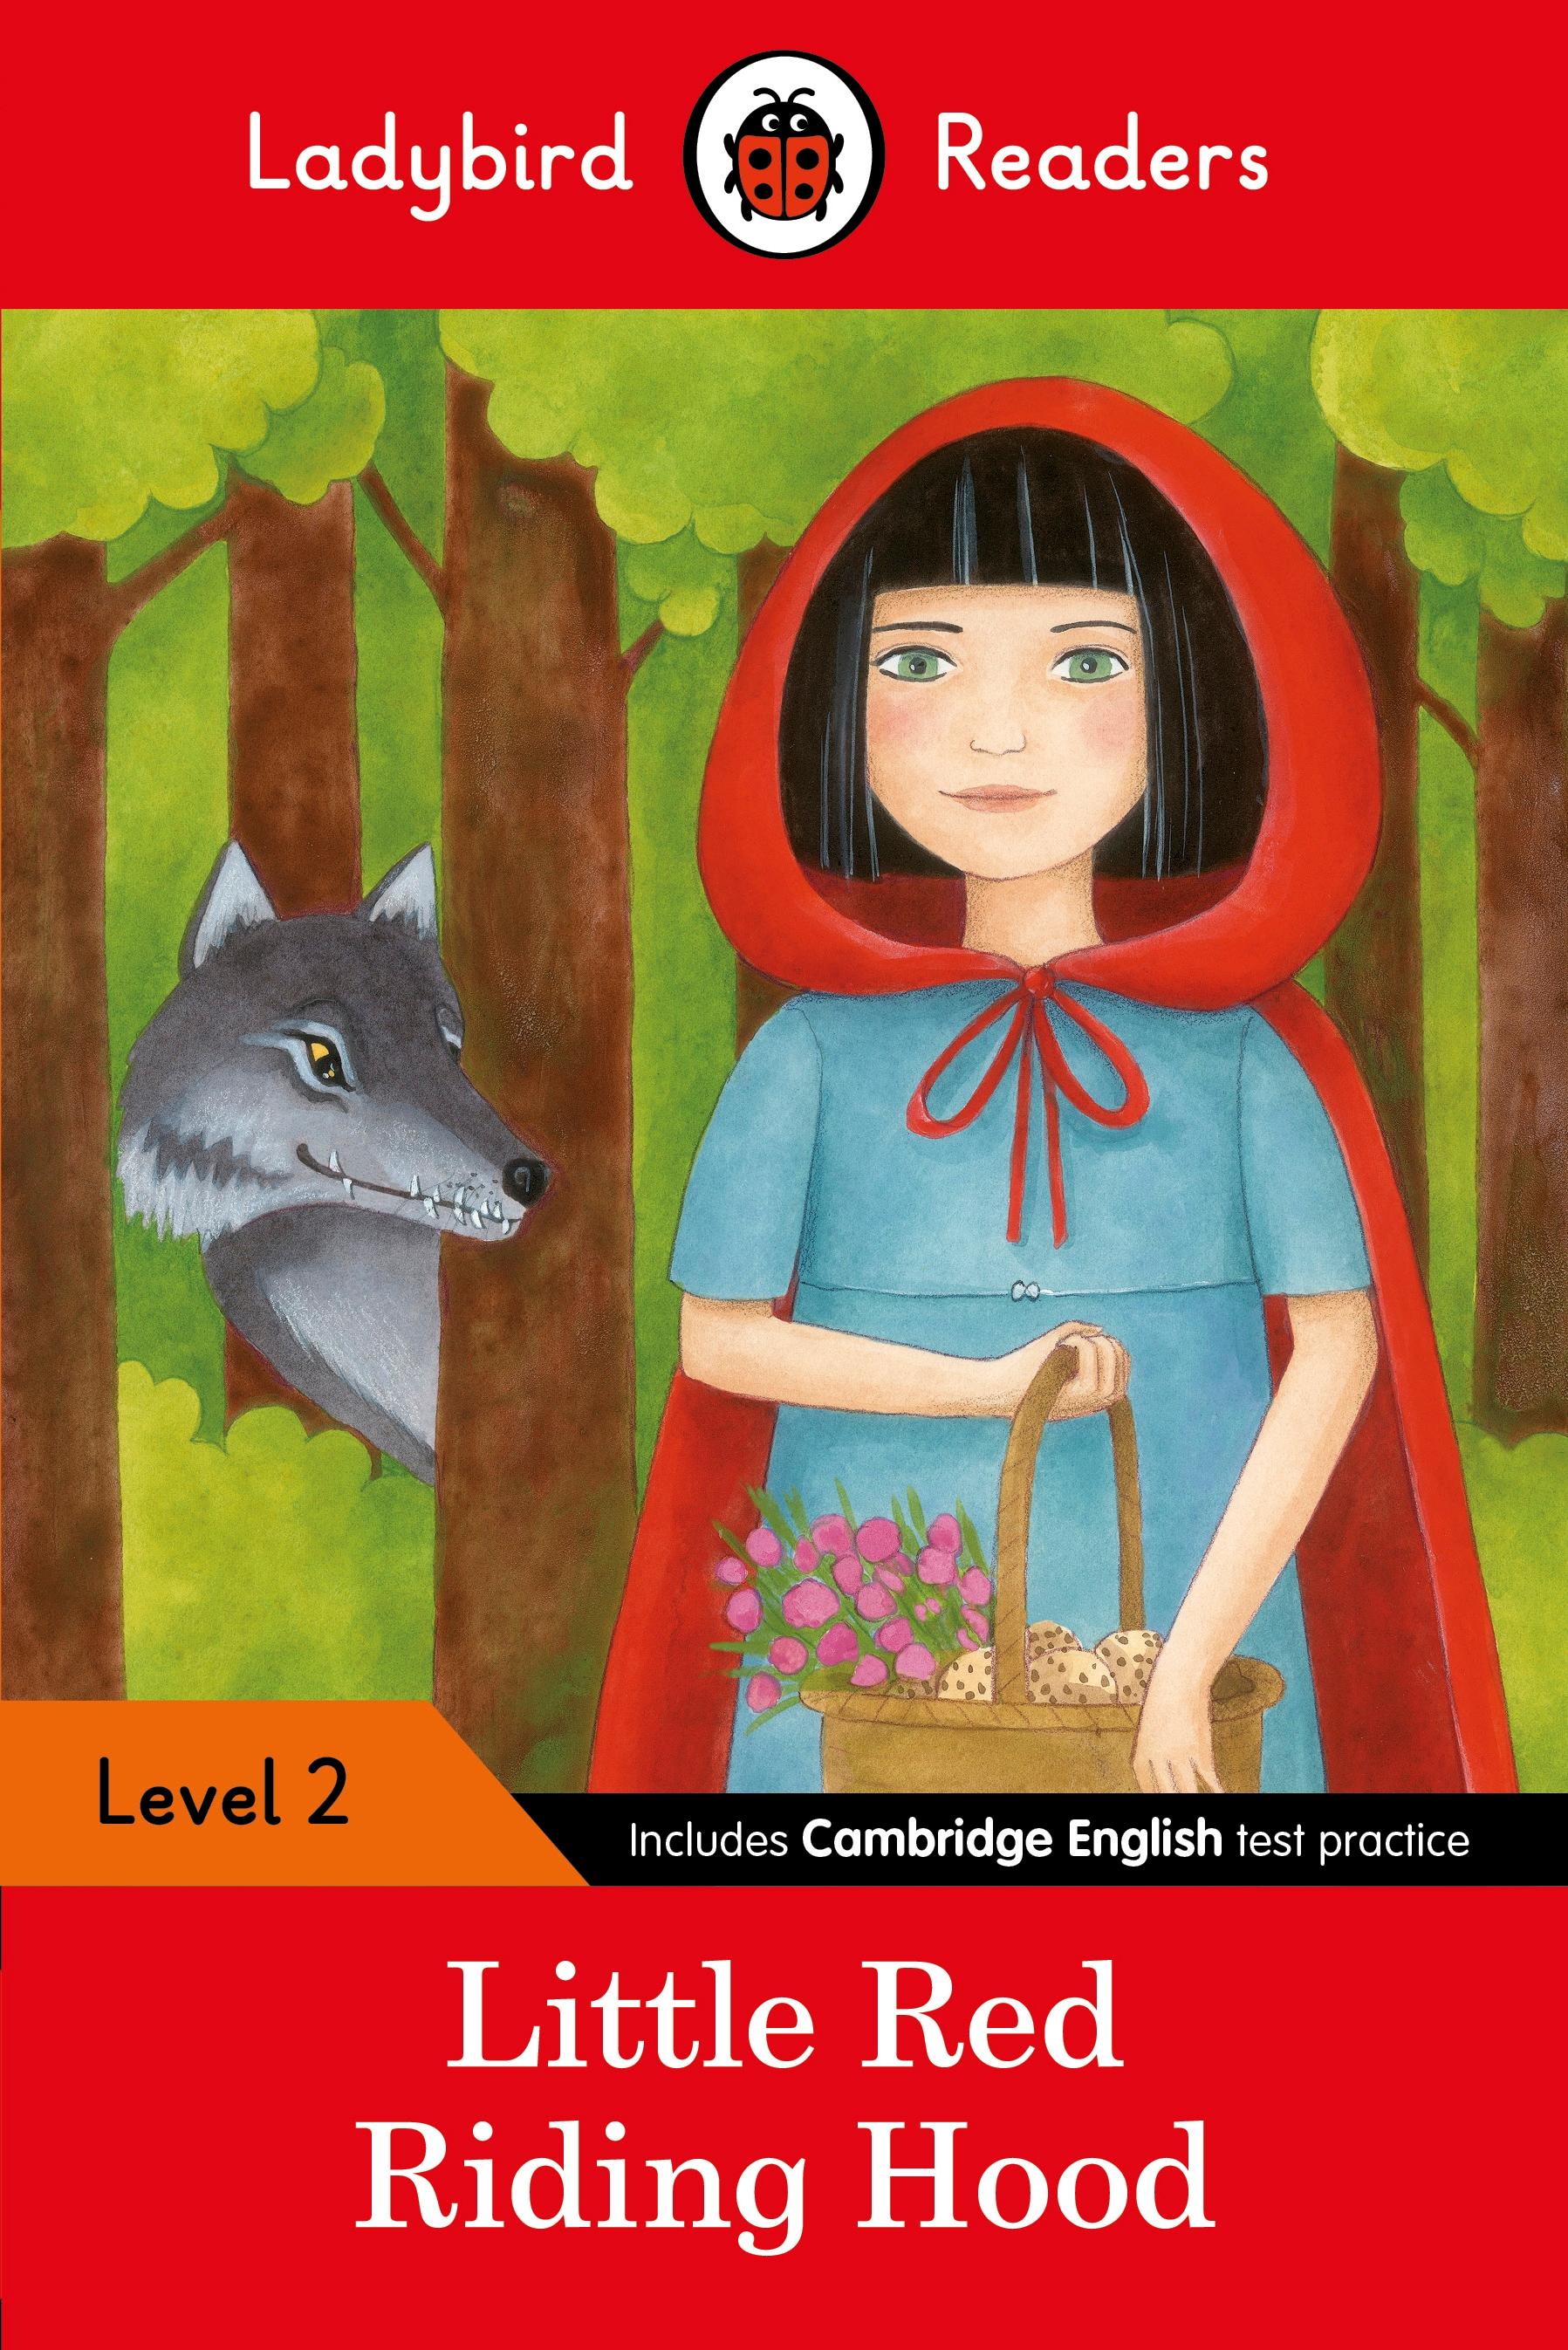 Little Red Riding Hood / Audio Download Included, Lexile measure 430L, Ladybird Readers - Ladybird Readers - Level 2, A1, YLE Movers, 200-300 words / Taschenbuch / 48 S. / Englisch / 2016